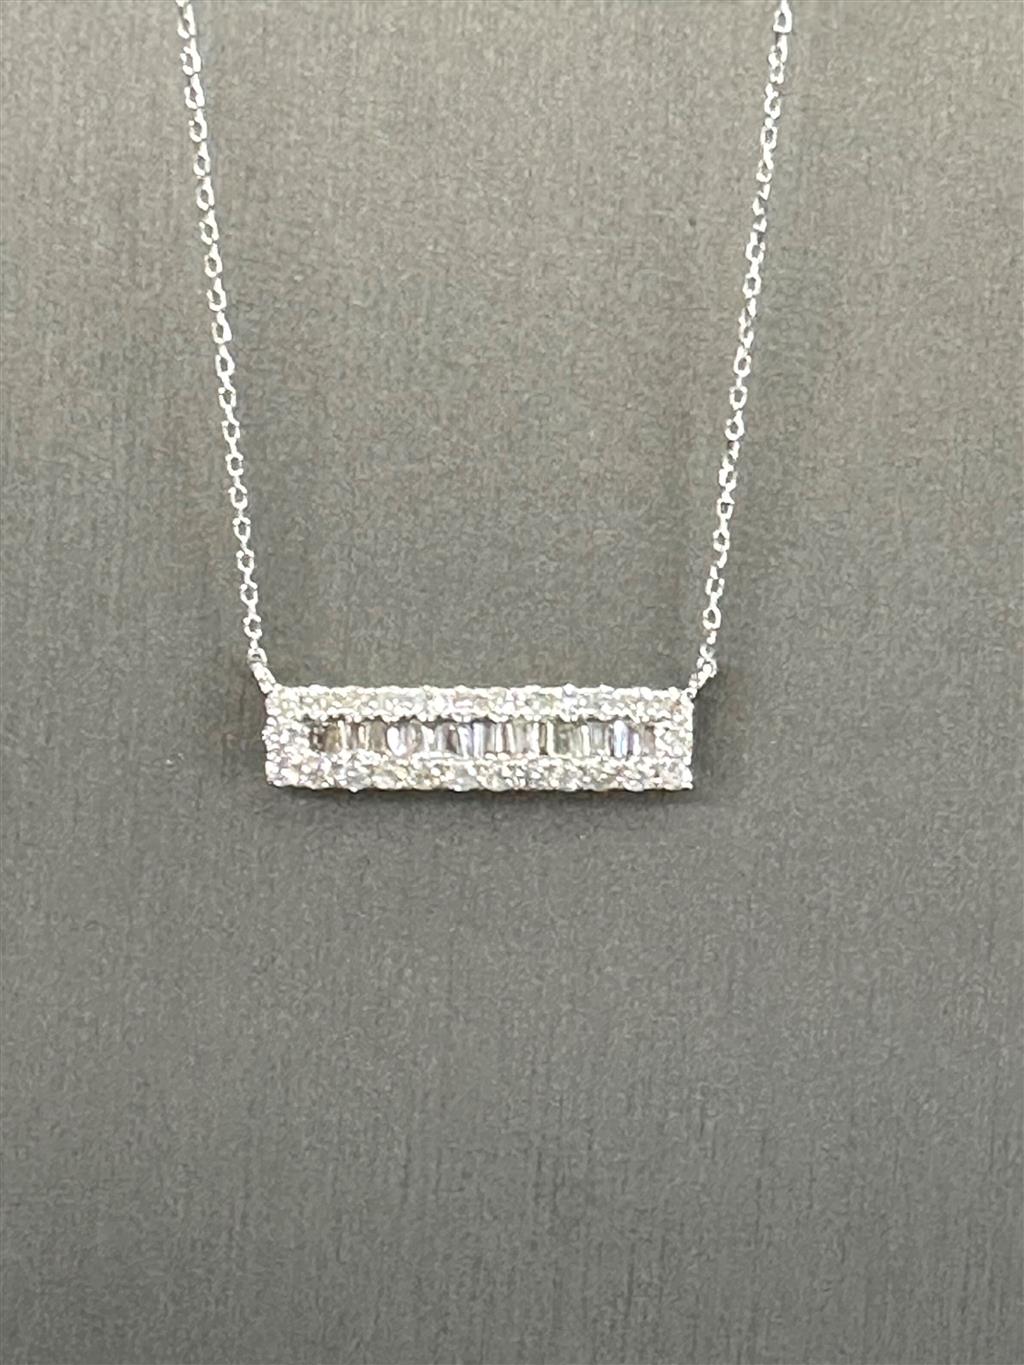 White Gold Round And Baguette Diamond Bar Necklace